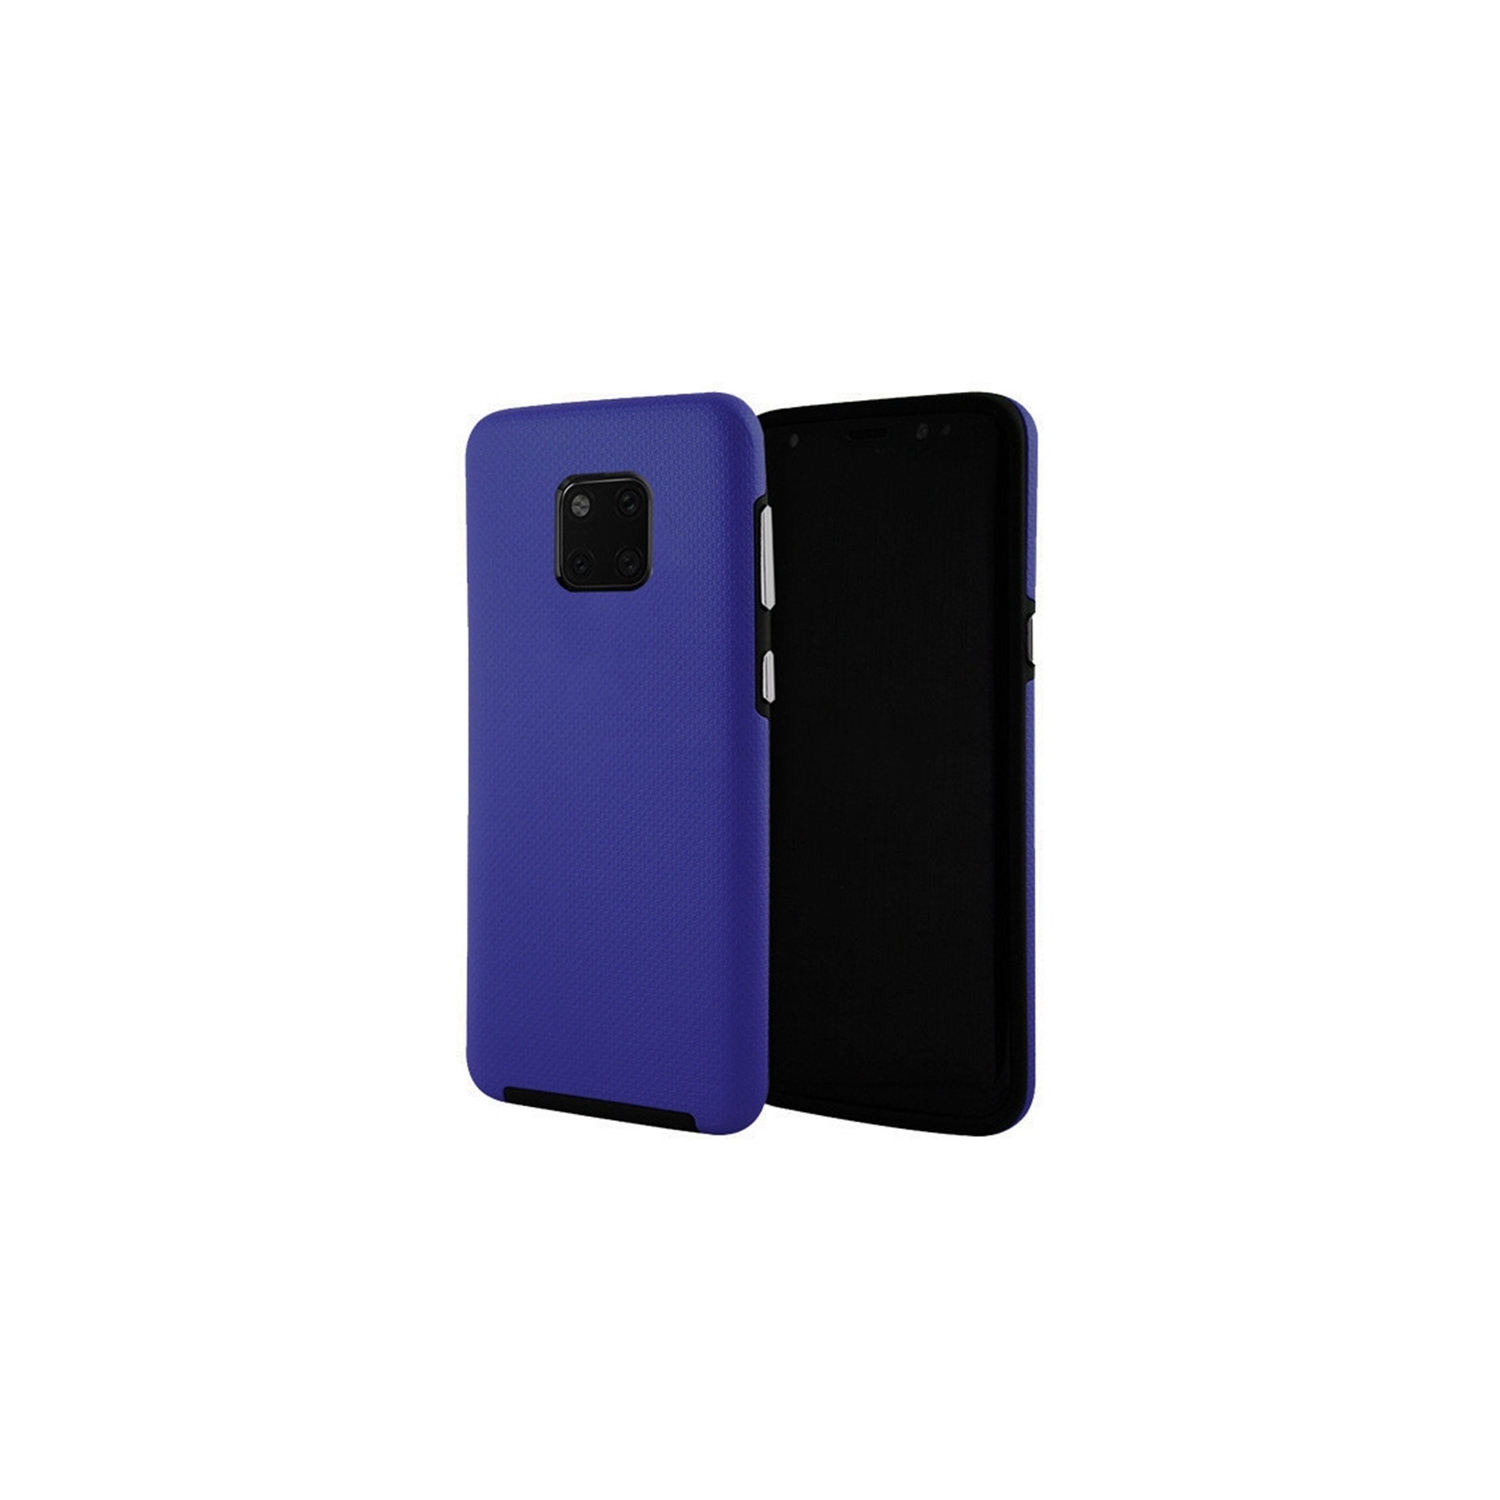 【CSmart】 Slim Fitted Hybrid Hard PC Shell Shockproof Scratch Resistant Case Cover for Huawei Mate 20 Pro, Navy